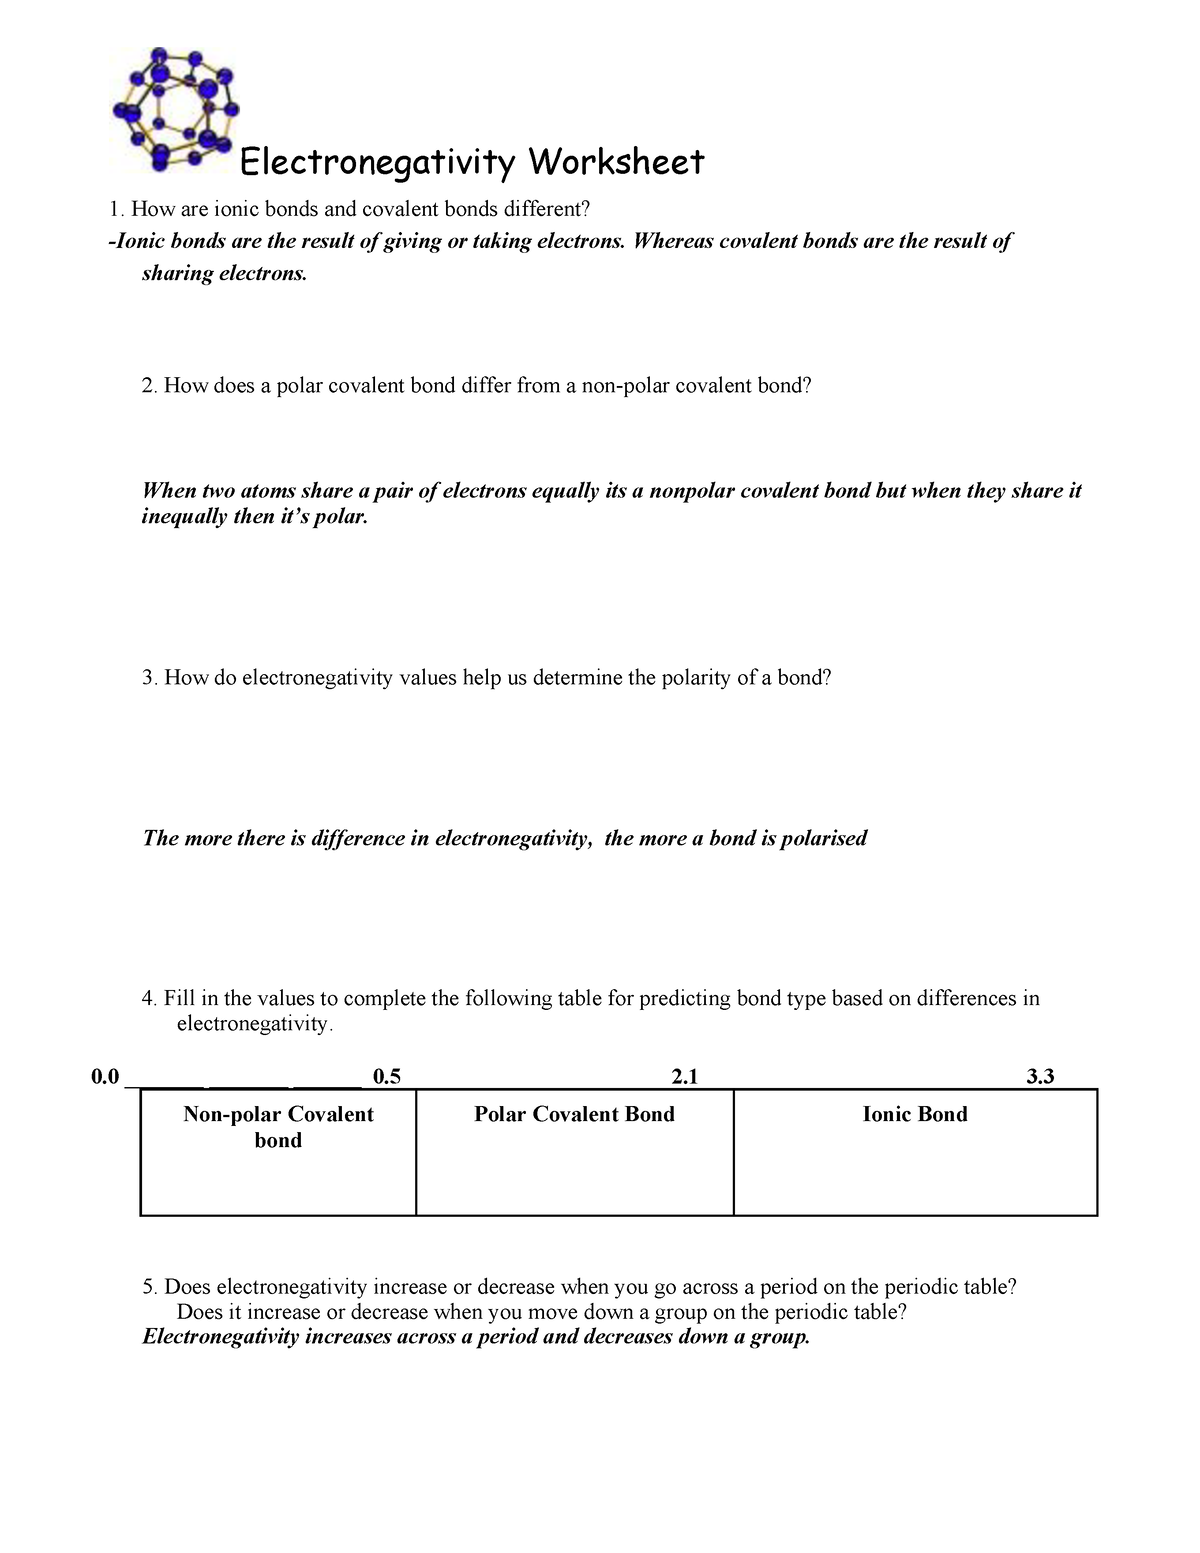 electronegativity-sheet-answers-key-electronegativity-worksheet-how-are-ionic-bonds-and